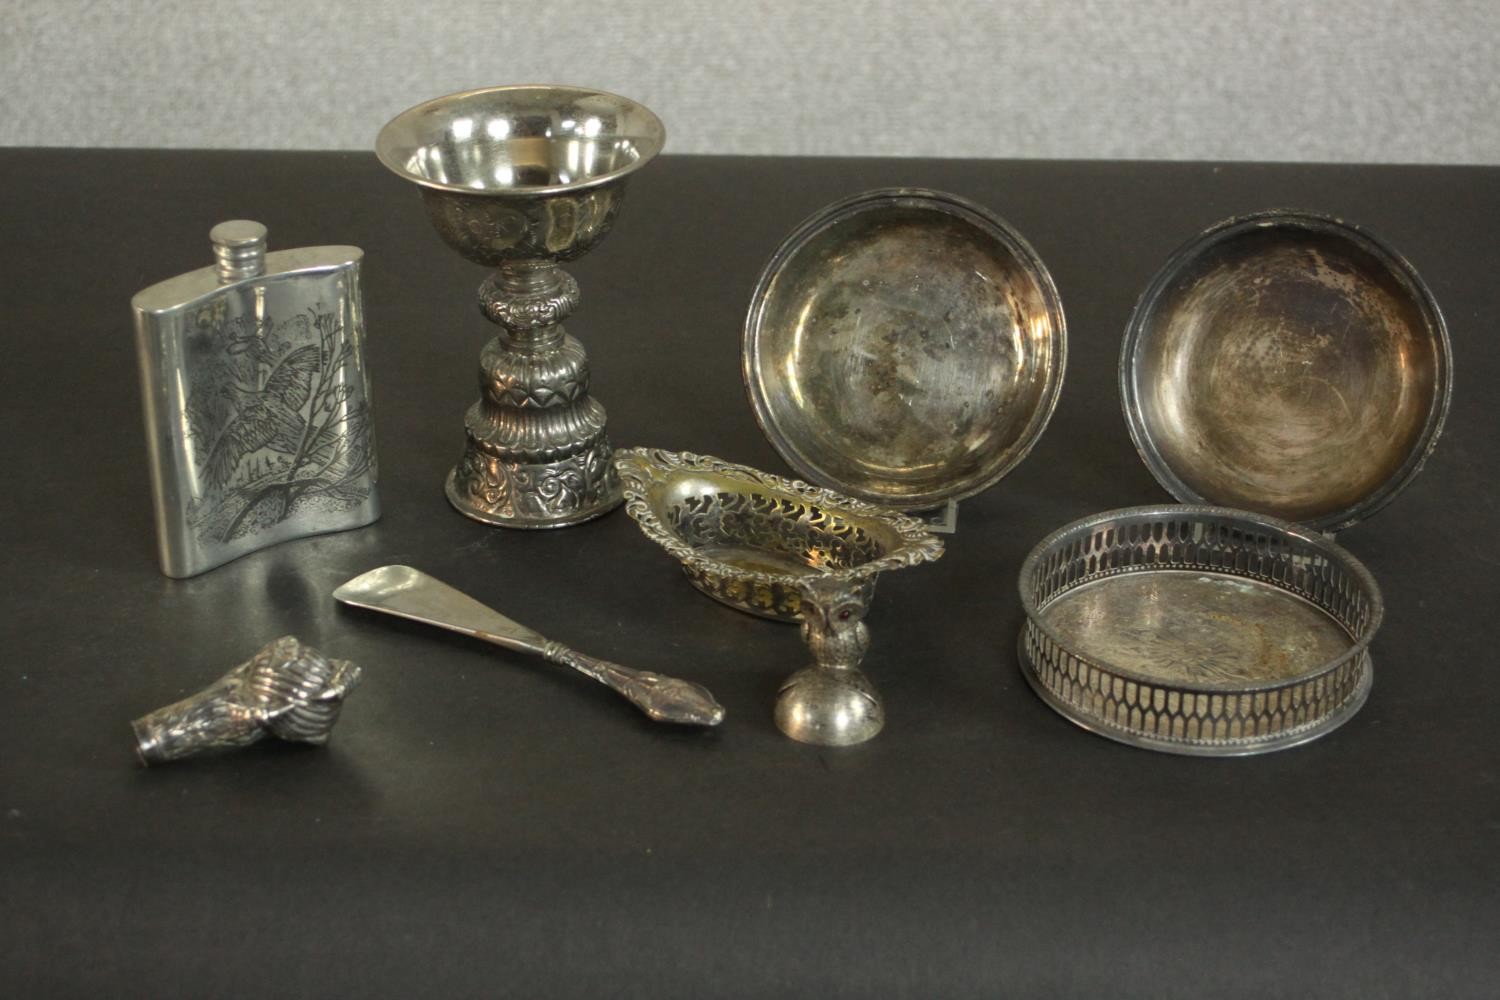 A collection of silver and silver plate items, including a novelty silver owl menu holder, a - Image 2 of 17